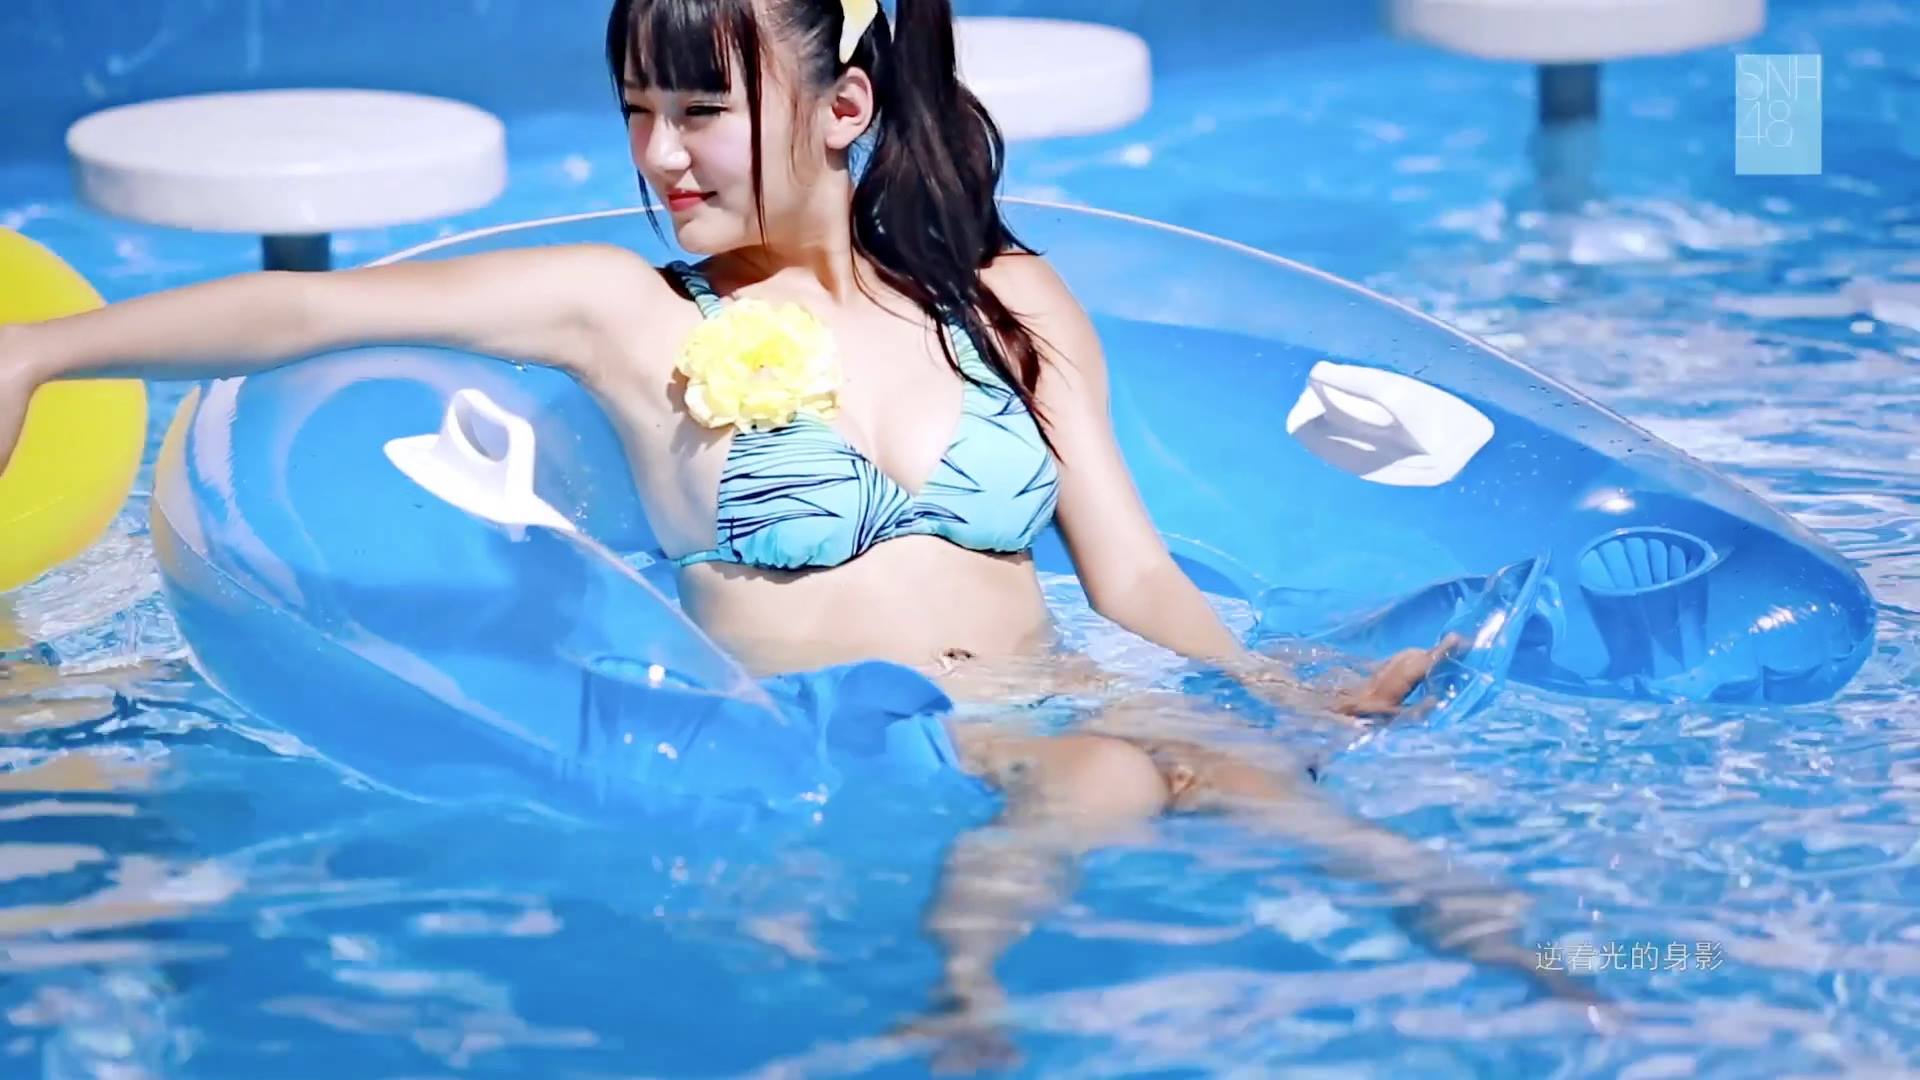 It’s Going to be a Hot Summer! Cool Down With SNH48’s Refreshing MV for “Ponytail to Shushu”!